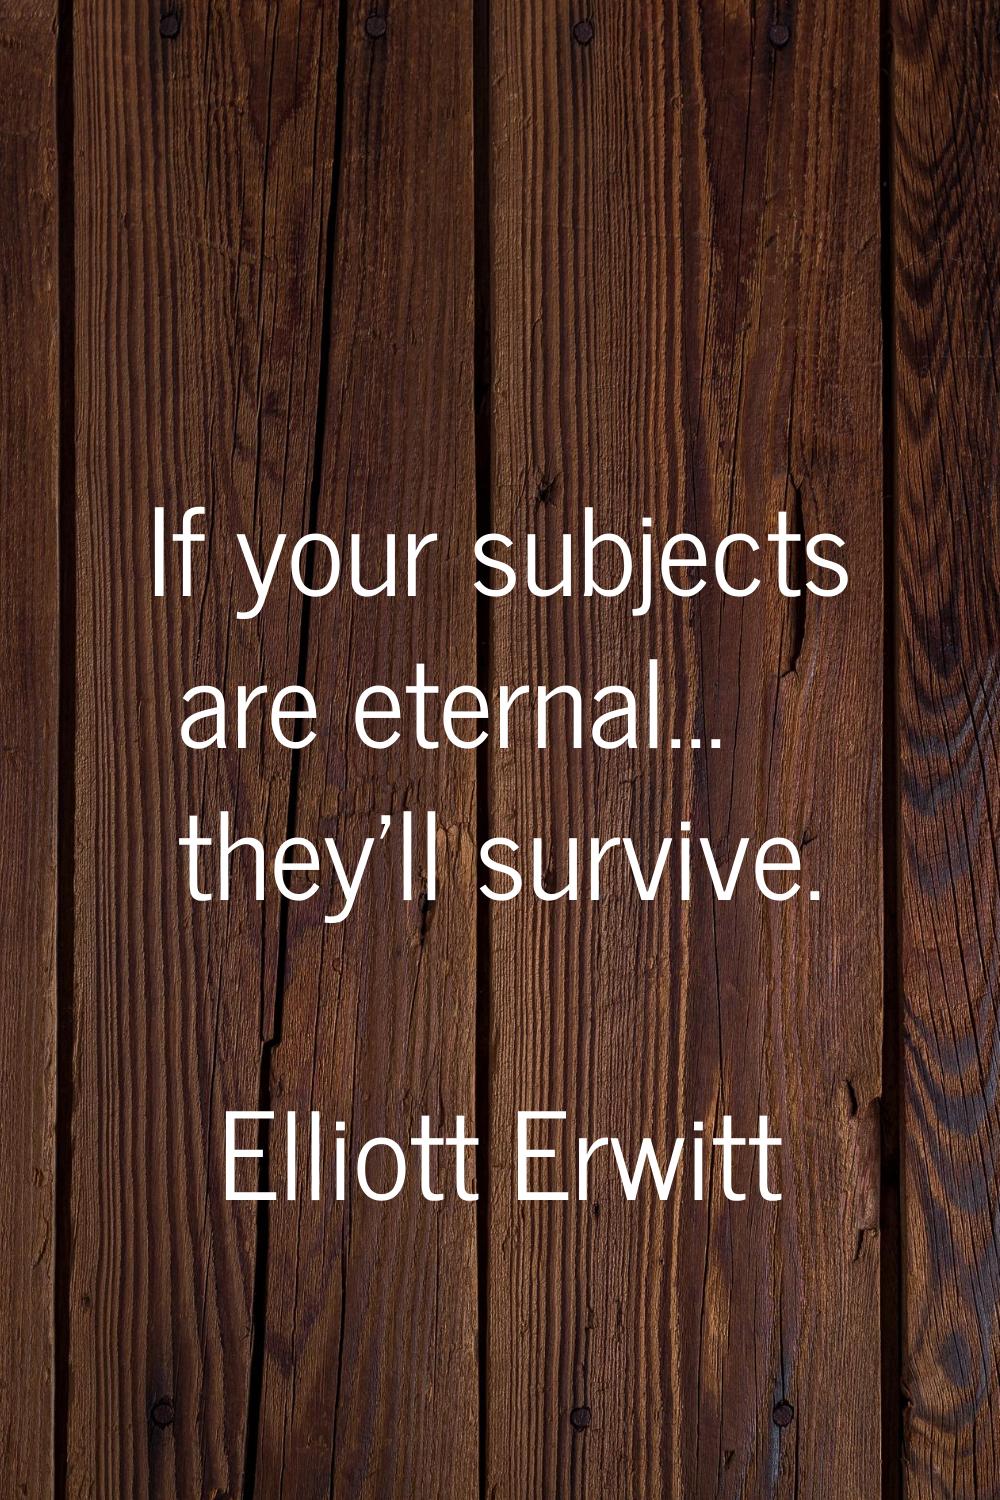 If your subjects are eternal... they'll survive.